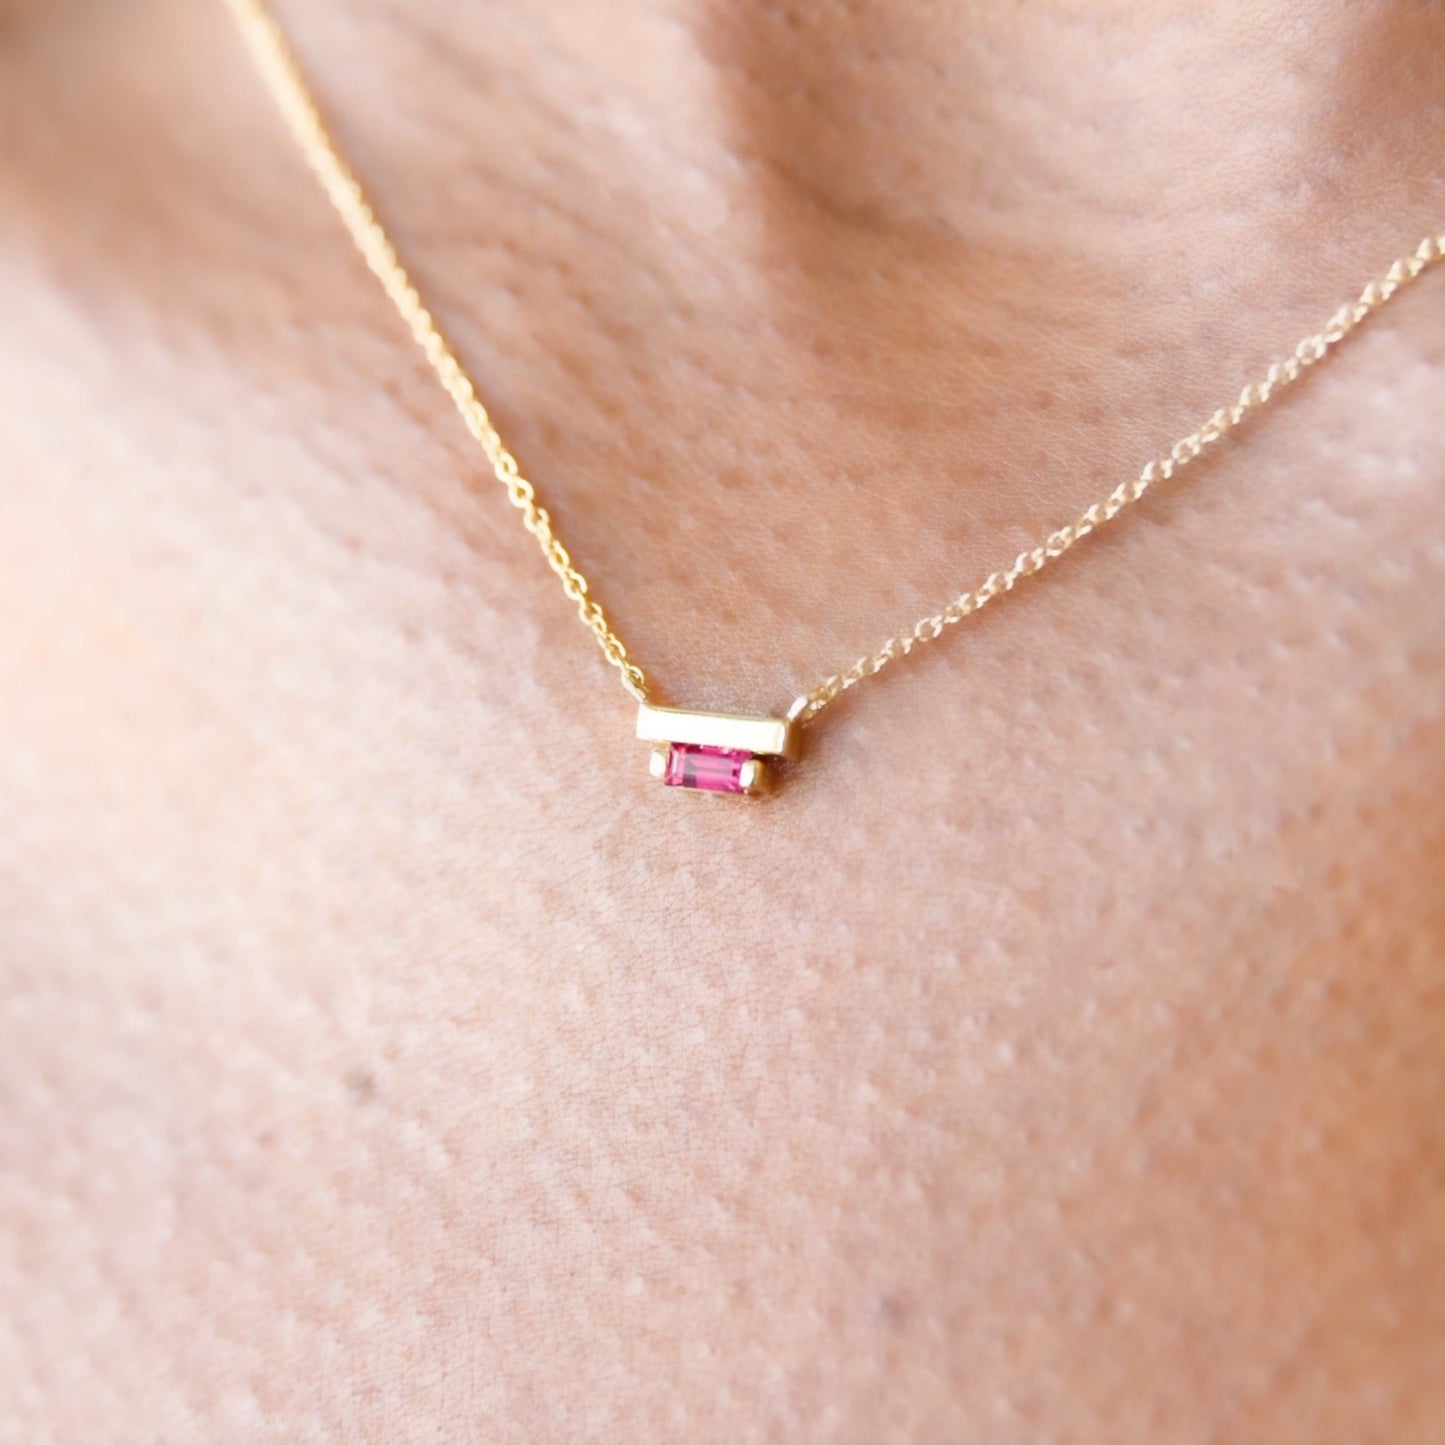 Ladder Climber Necklace - Ruby